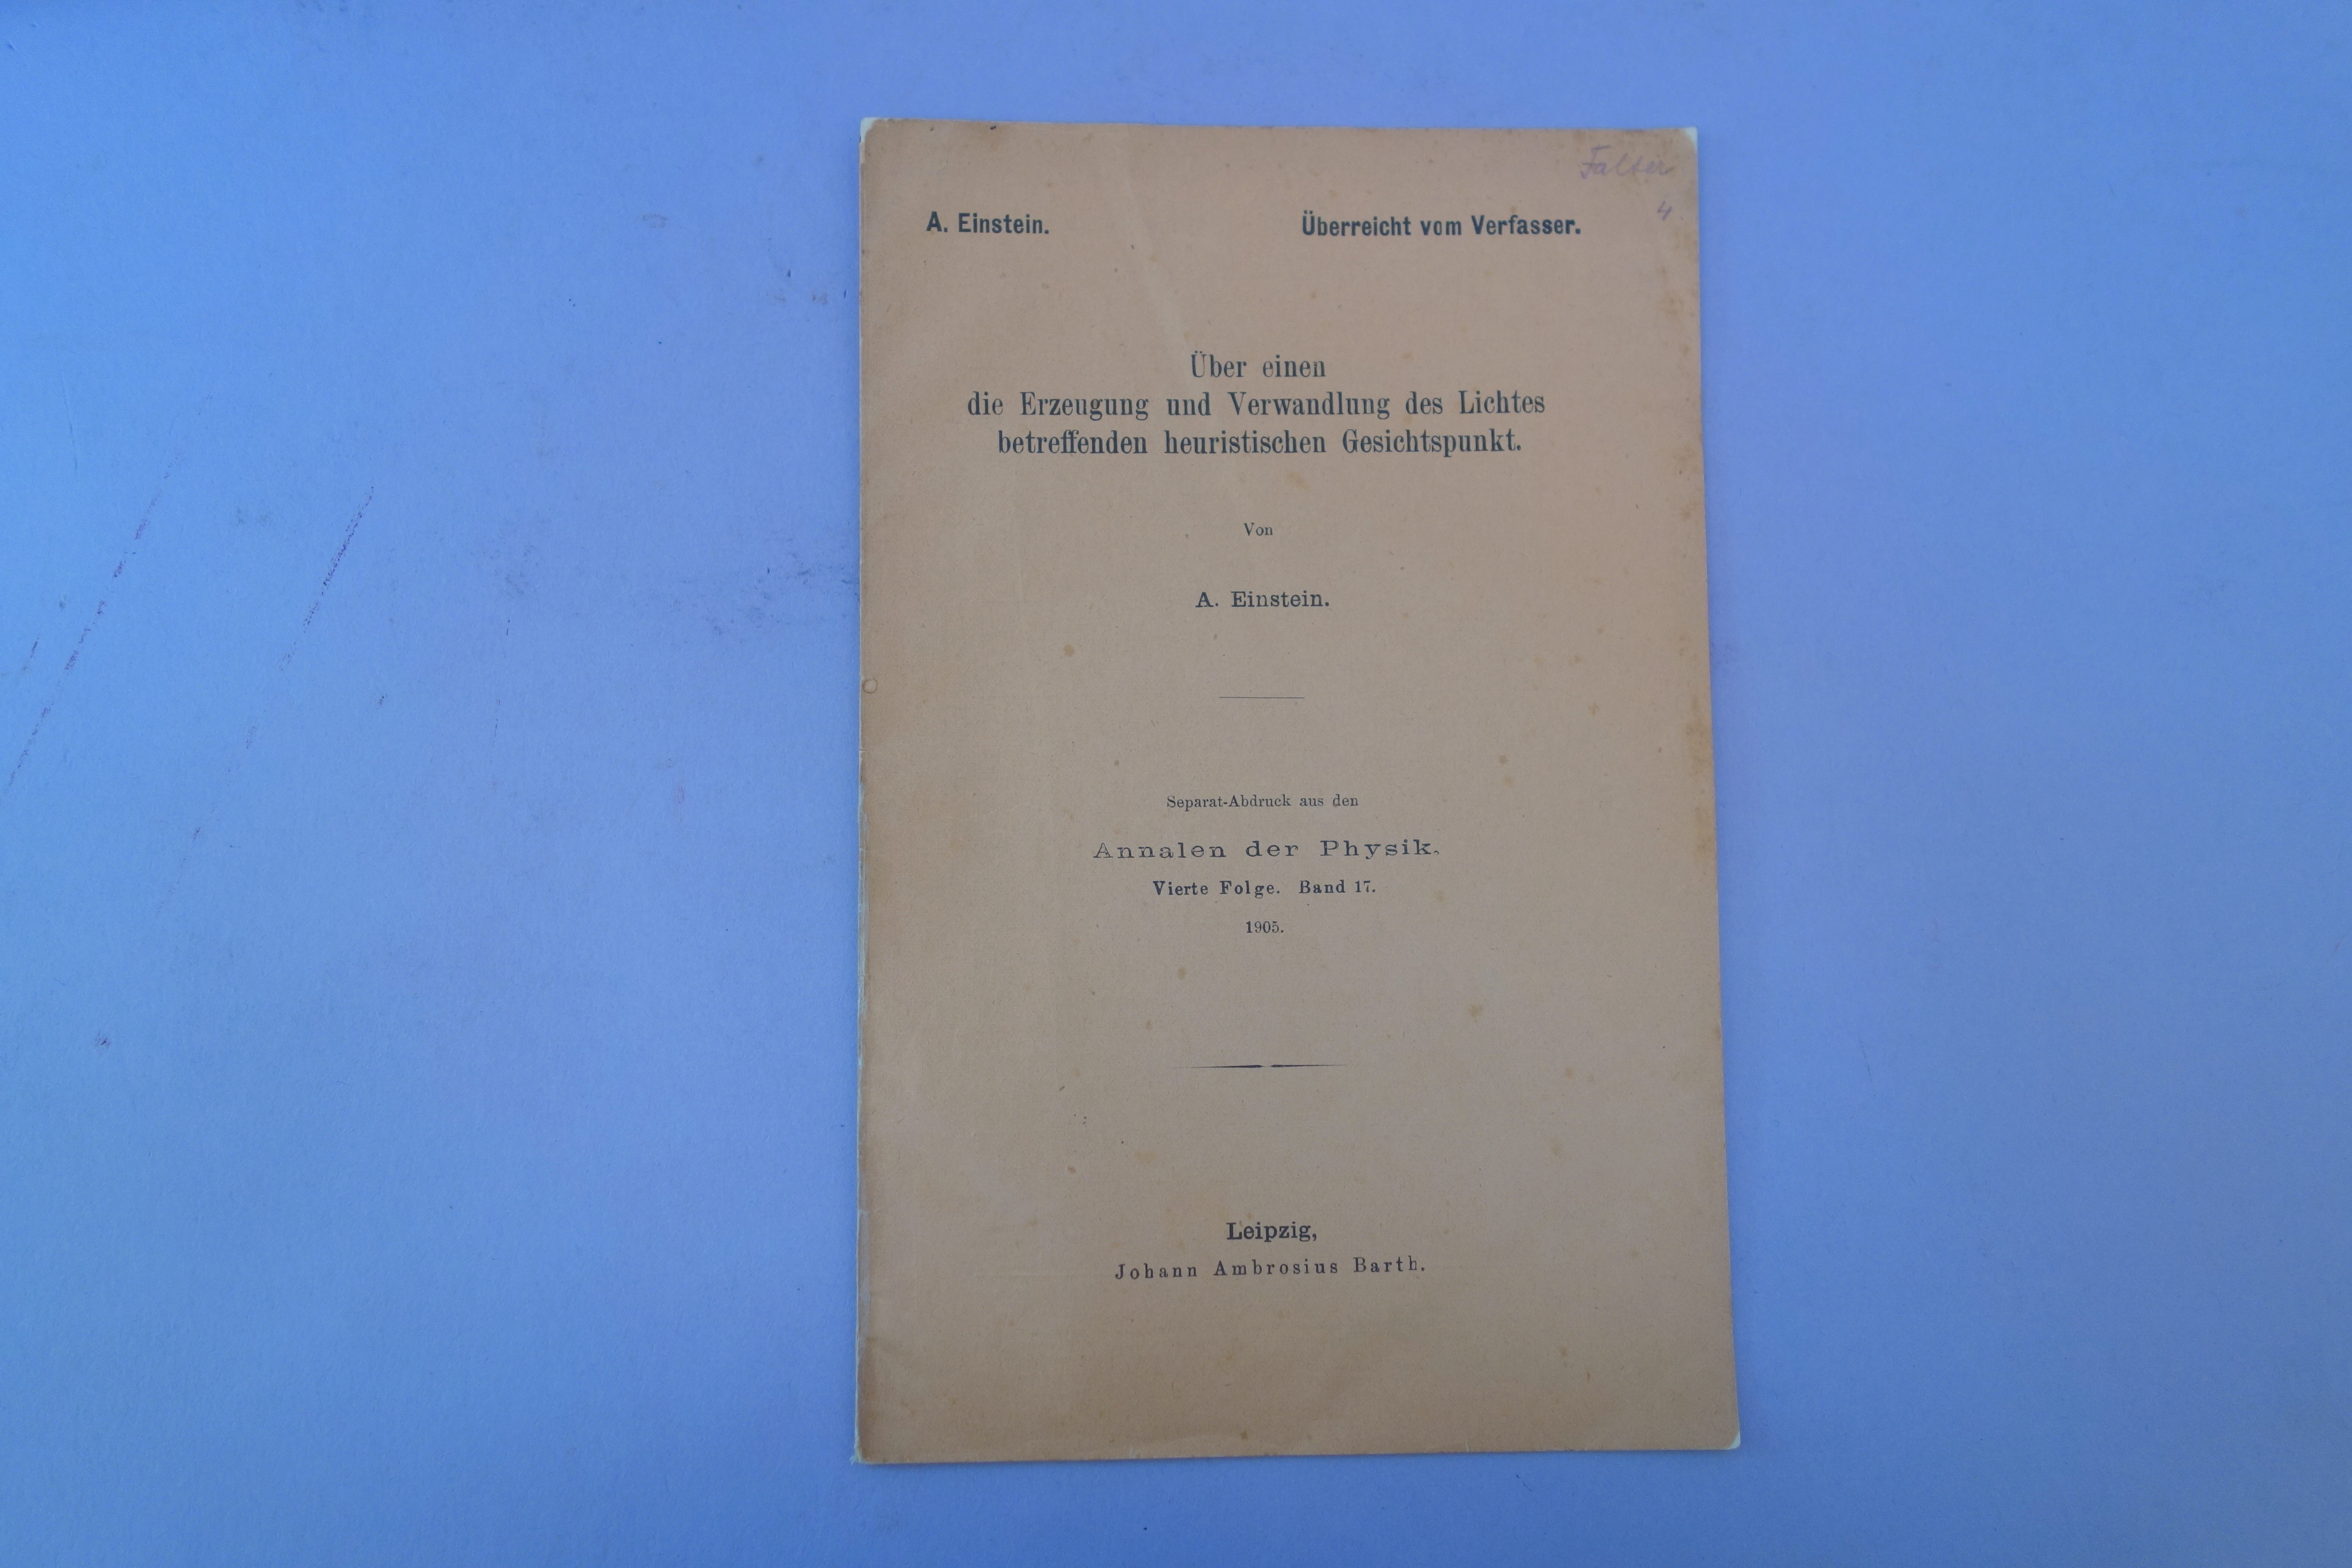 Upper cover of the offprint of Einstein's paper on light quanta.